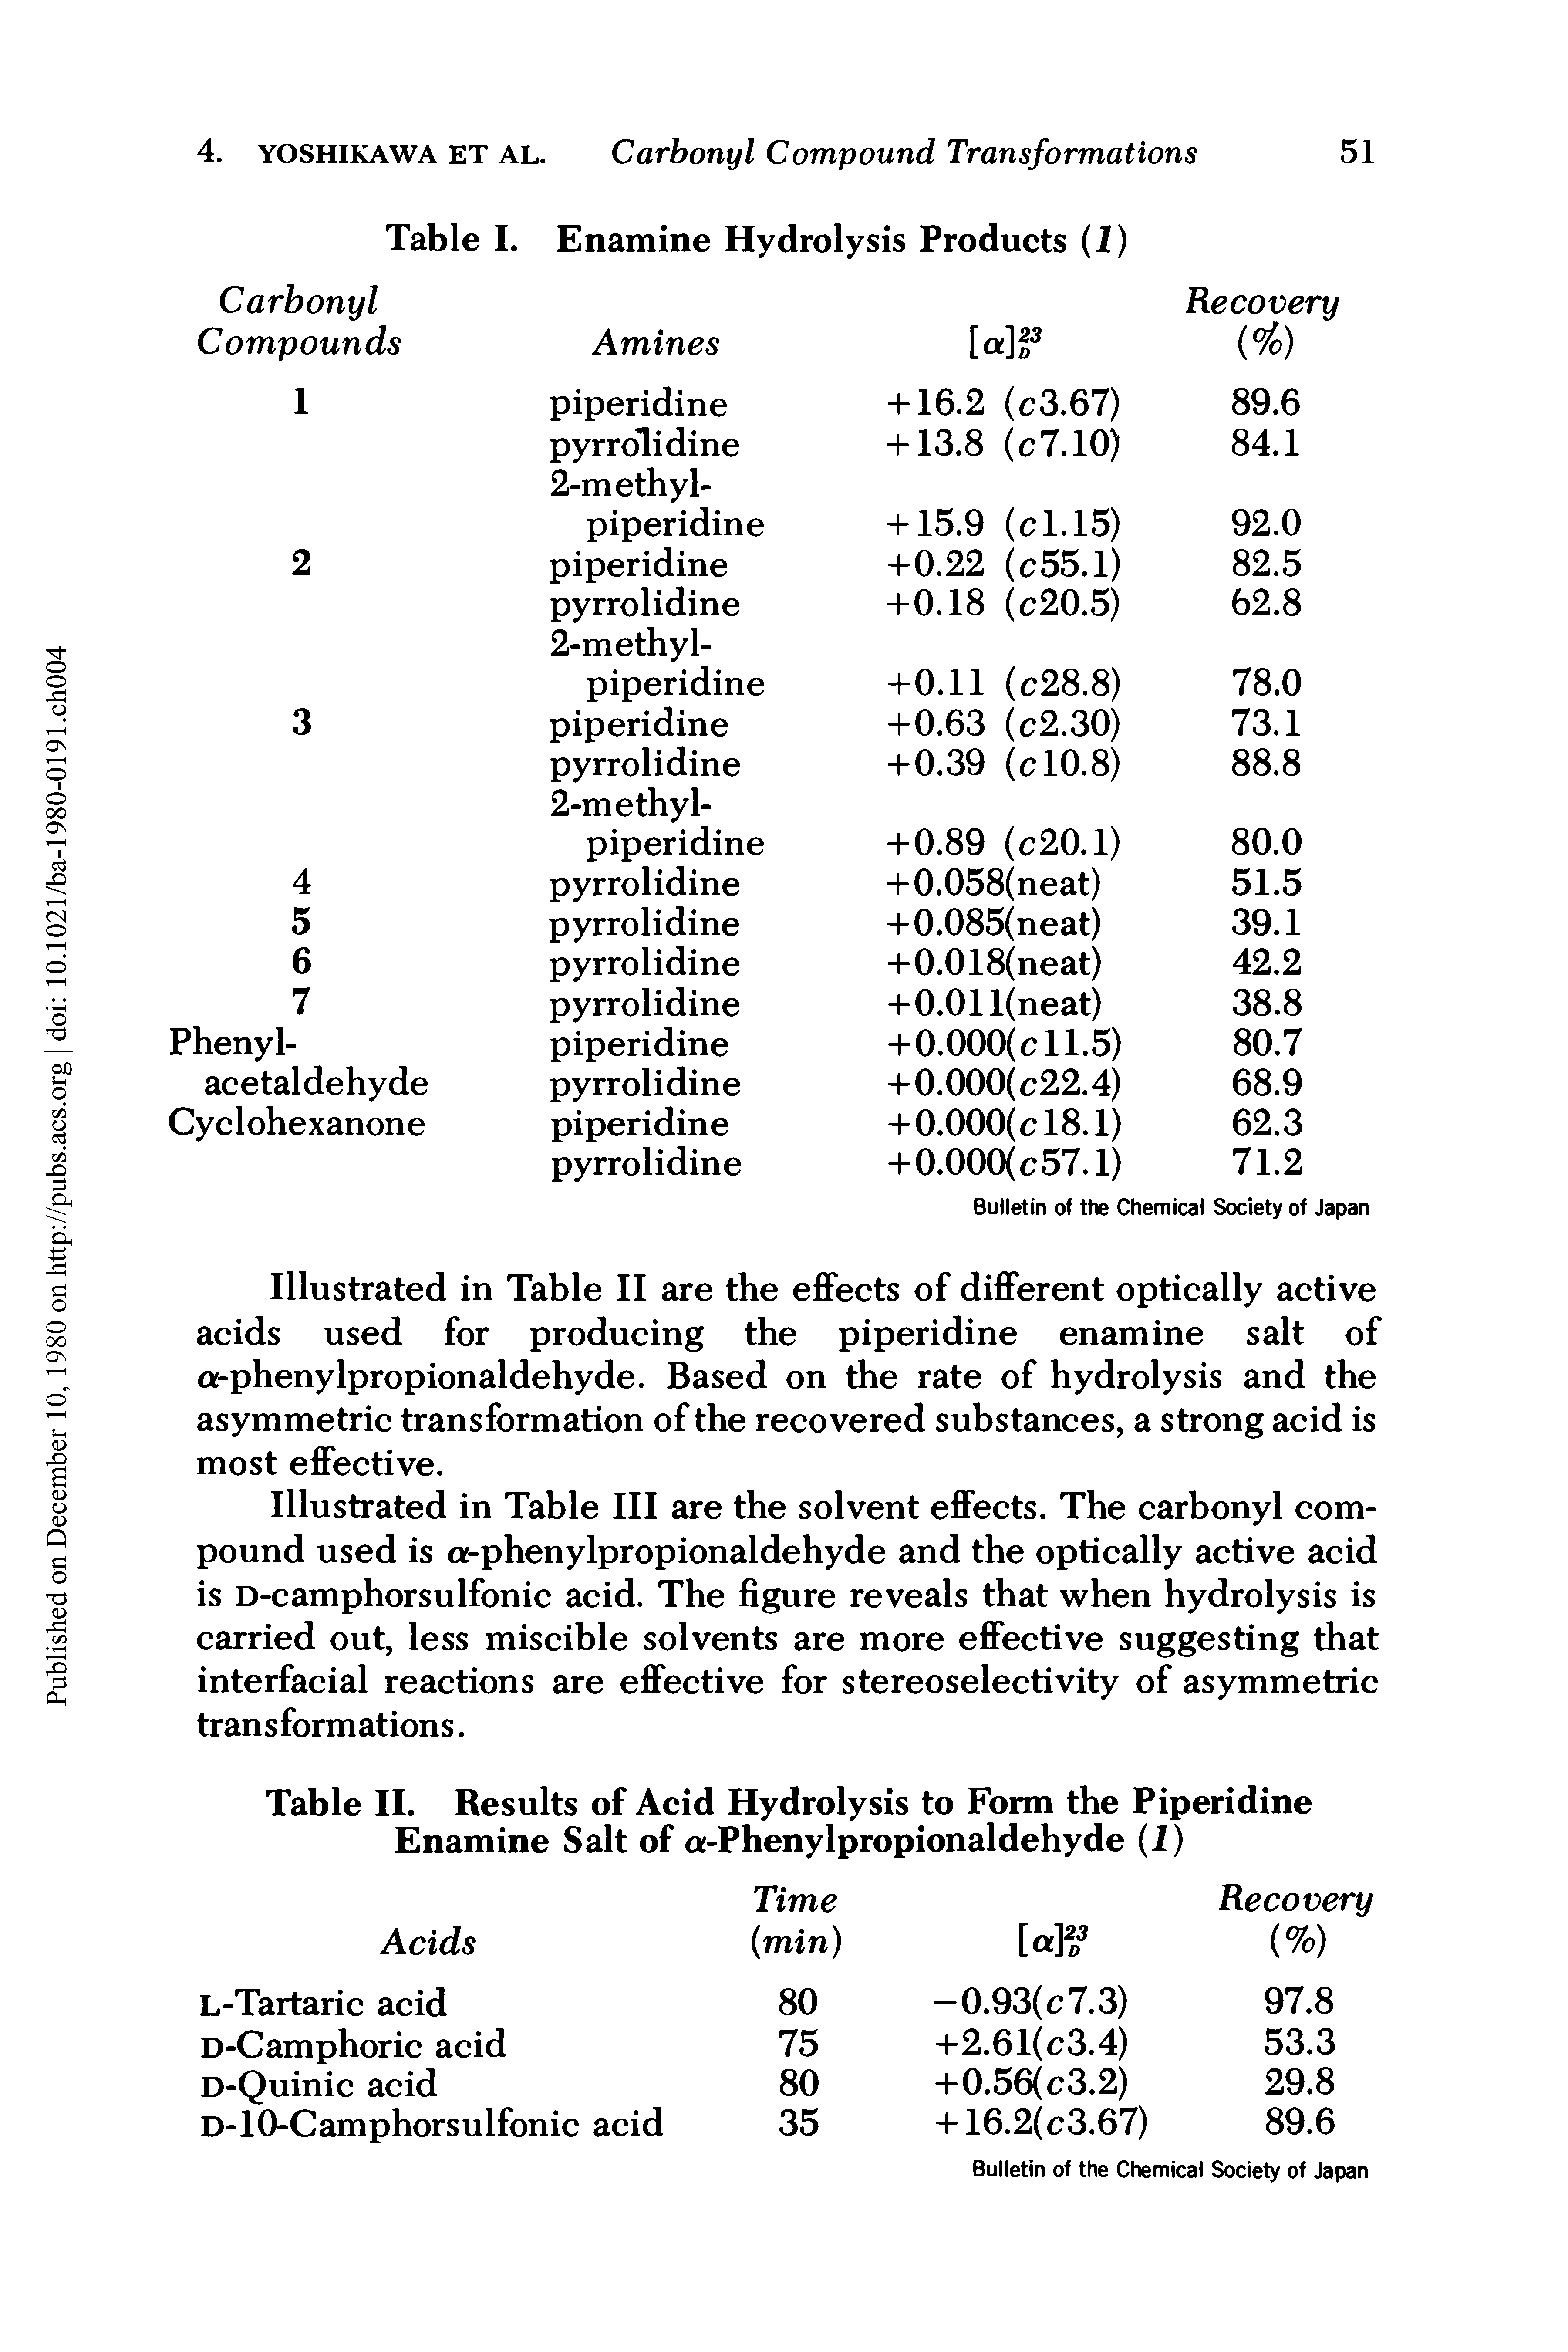 Table II. Results of Acid Hydrolysis to Form the Piperidine Enamine Salt of a-Phenylpropionaldehyde (1)...